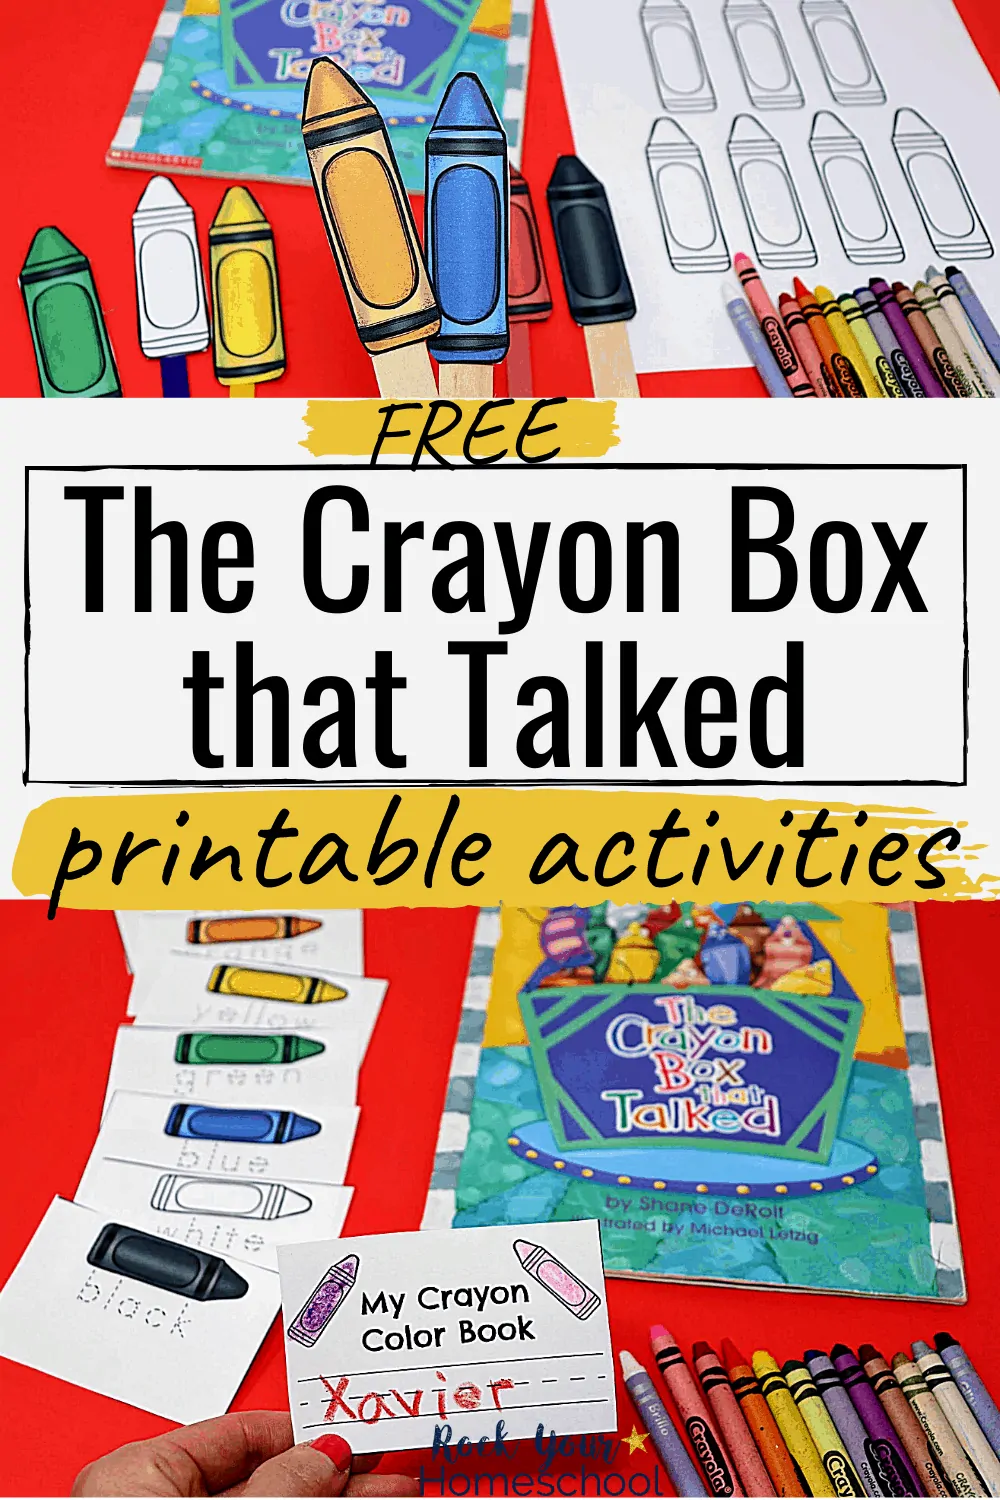 Free Printable Activities for The Crayon Box That Talked